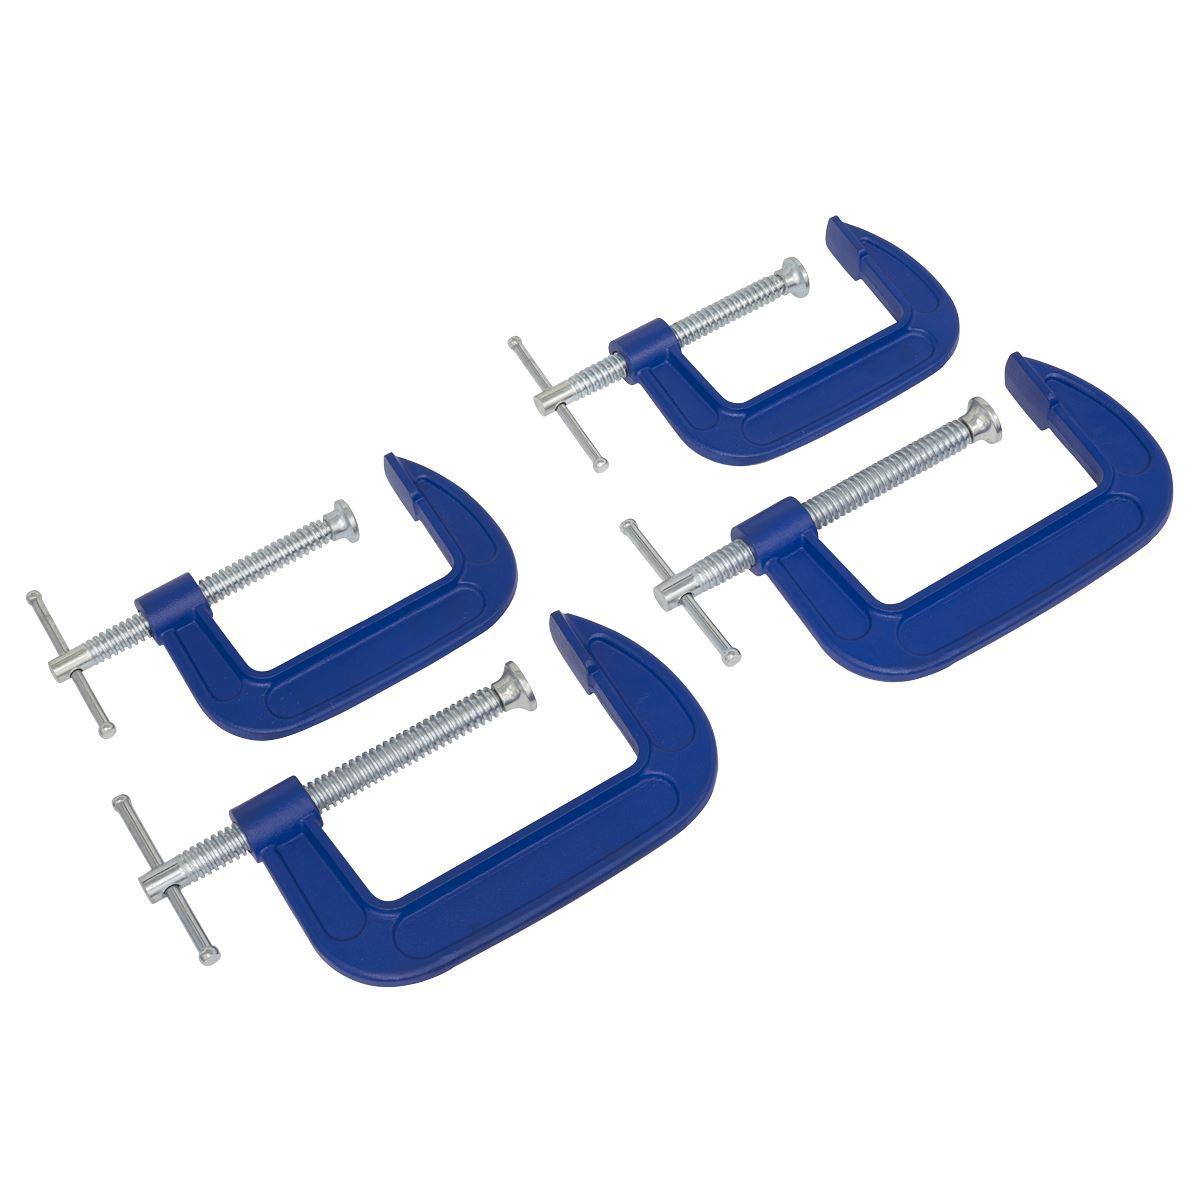 Sealey G-Clamp Set 75mm & 100mm - 4pc